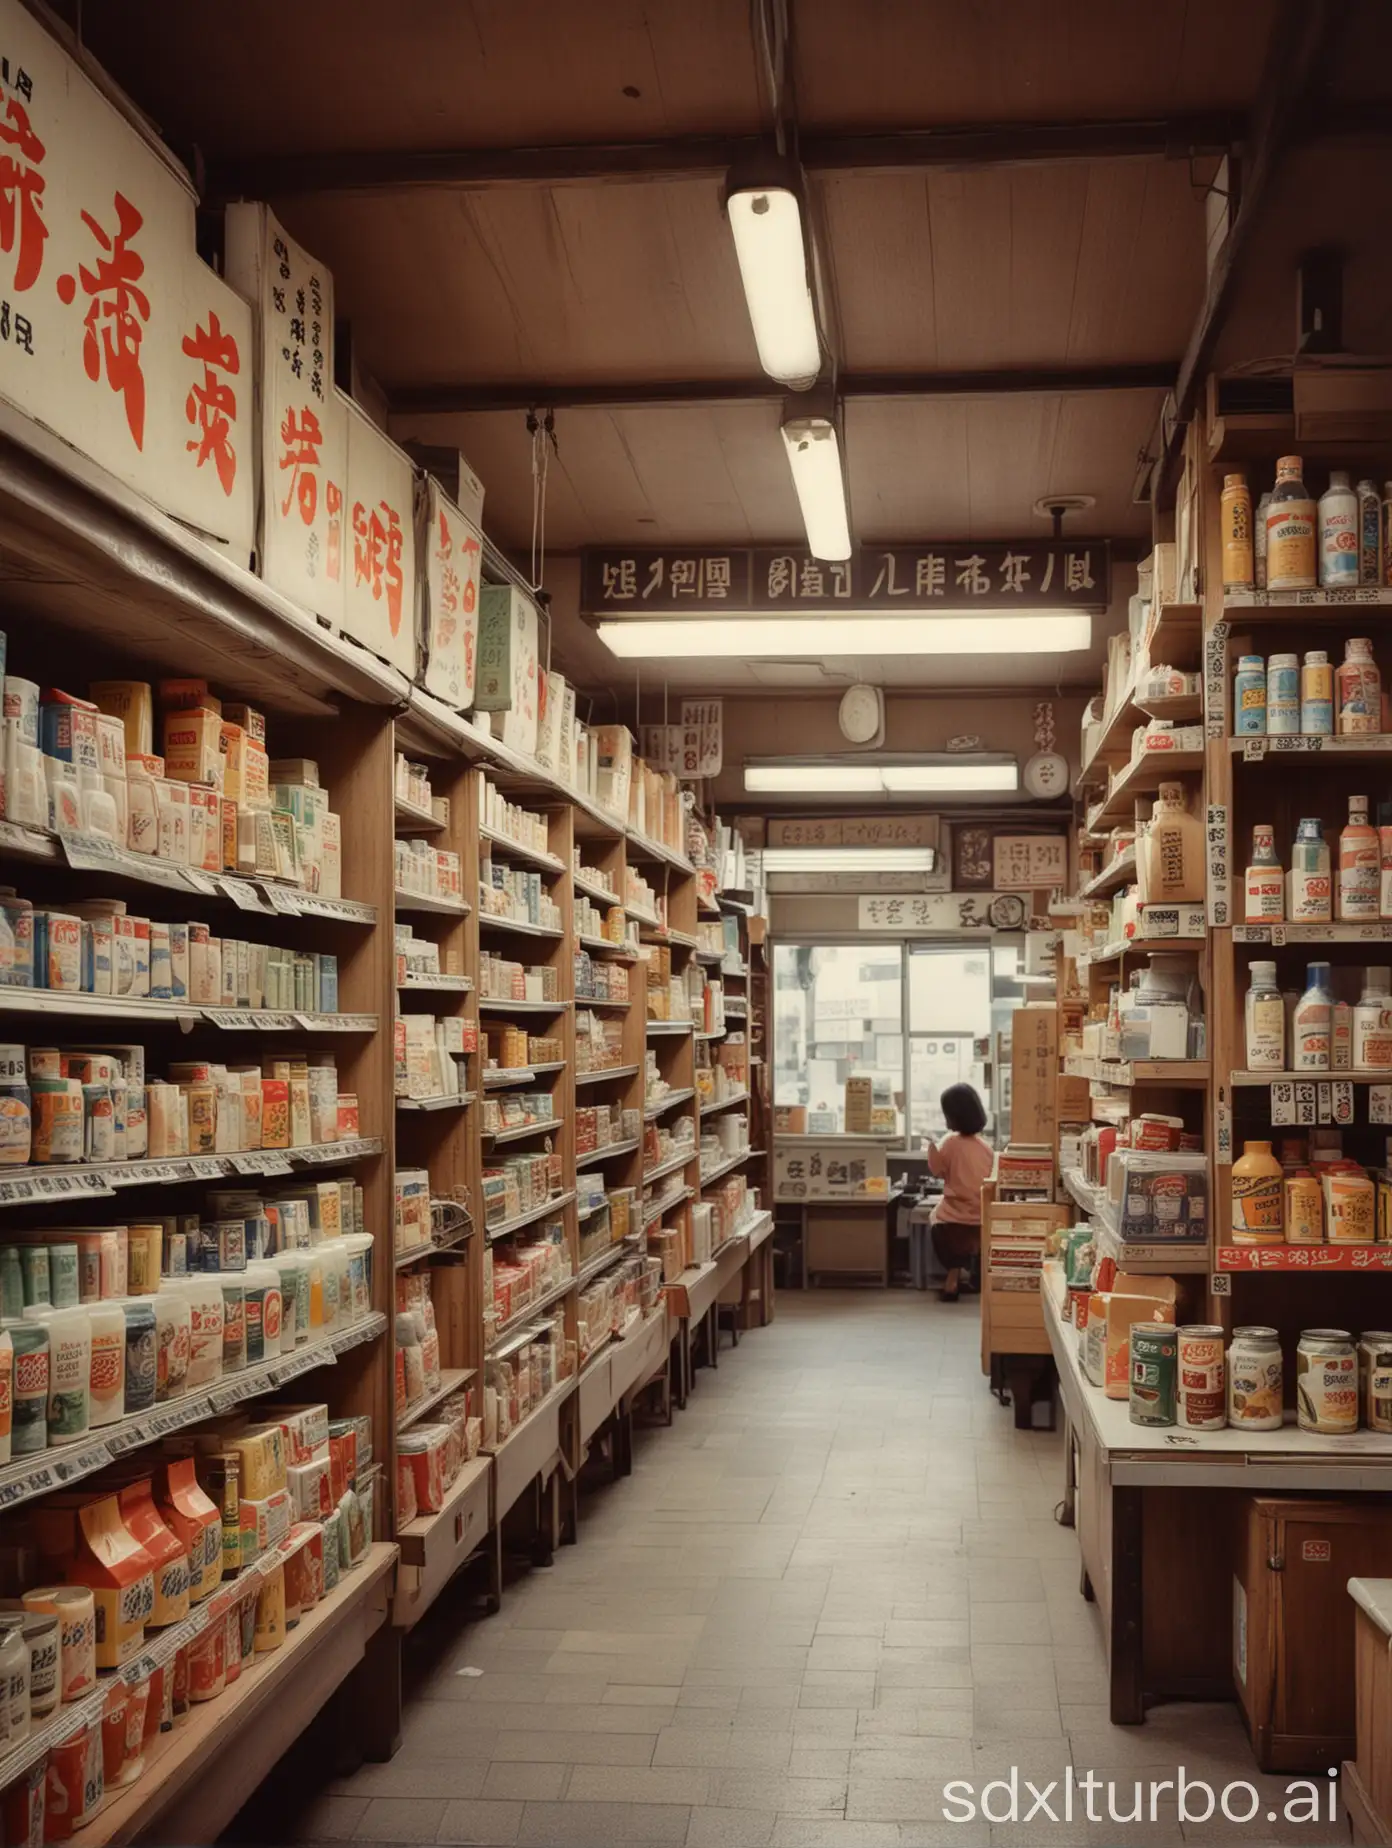 Nostalgic View of Vintage Japanese Grocery Store from 1960s